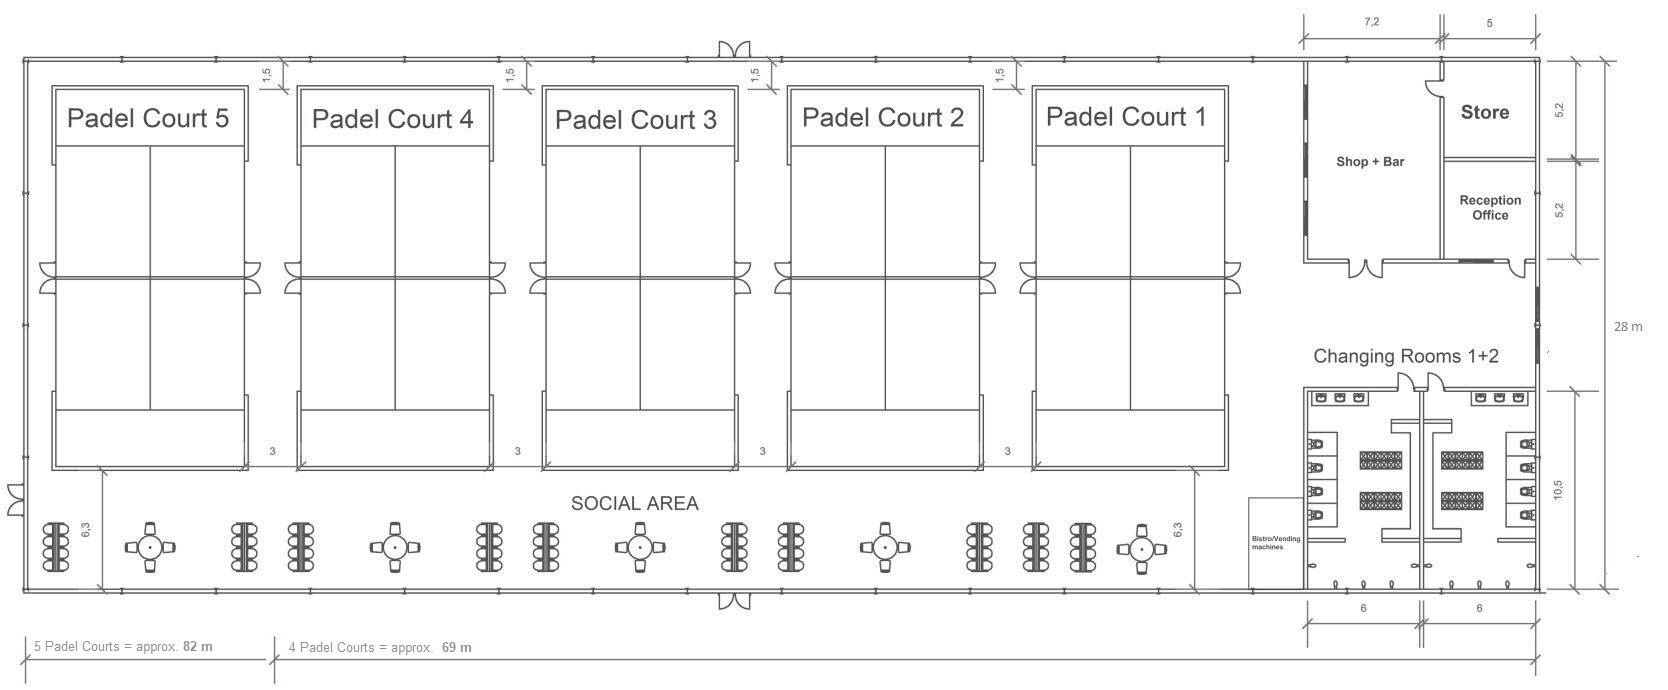 Layouts for Padel Clubs Padel Courts Construction Company